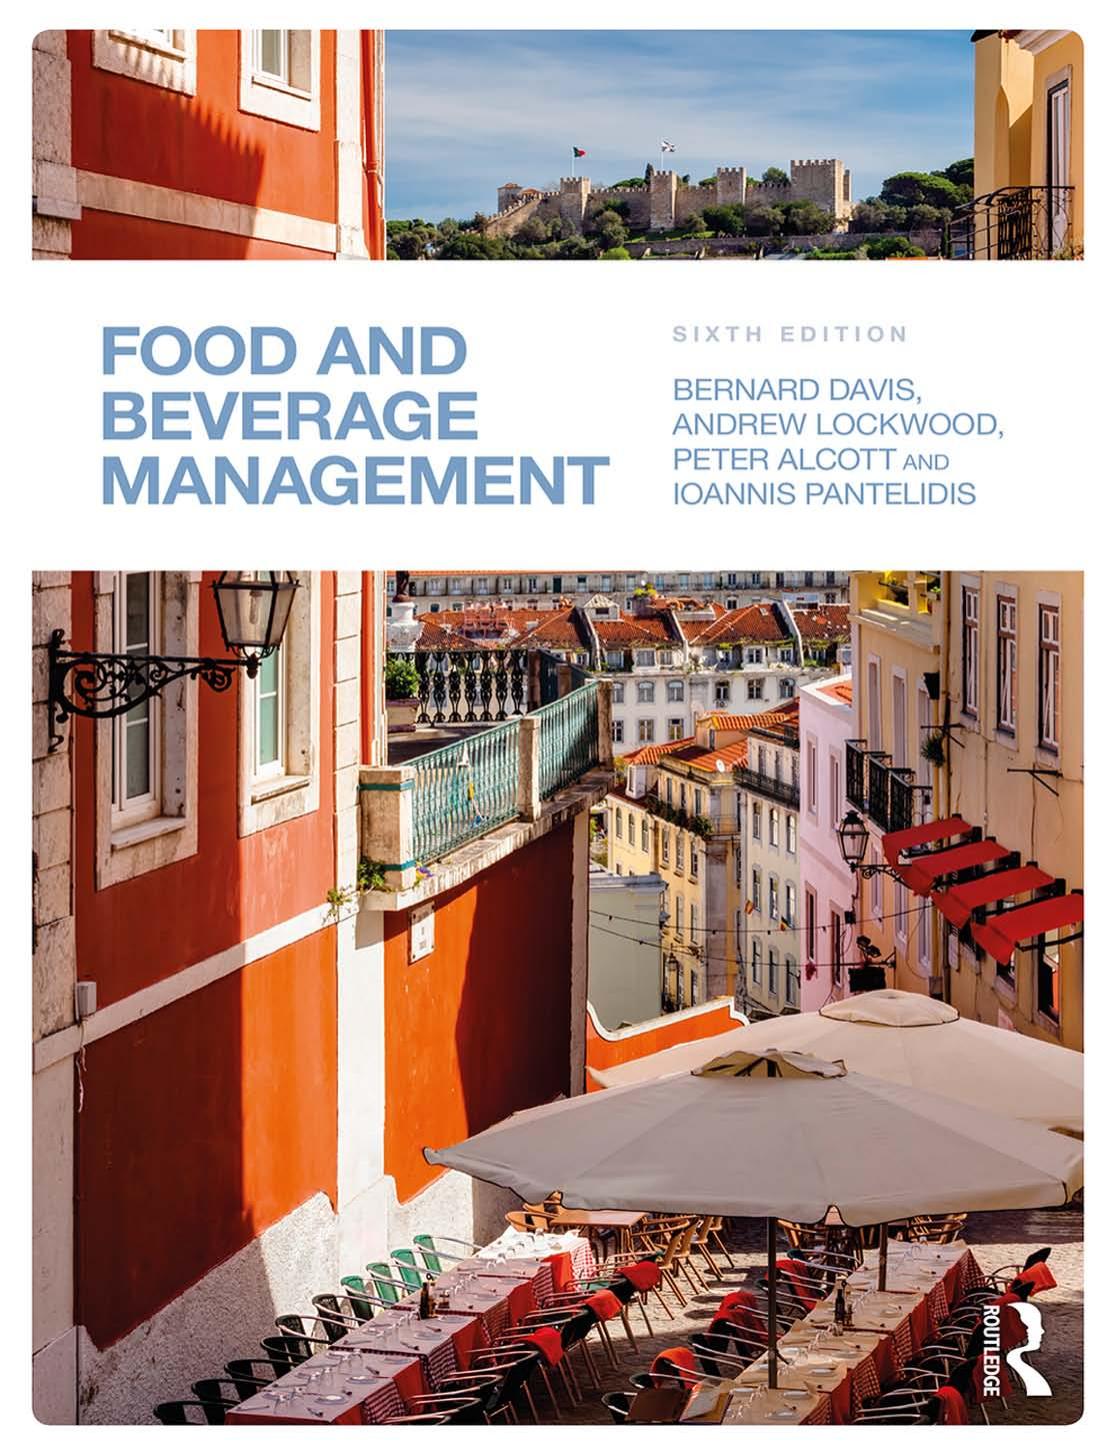 Food and Beverage Management 6th Edition.jpg